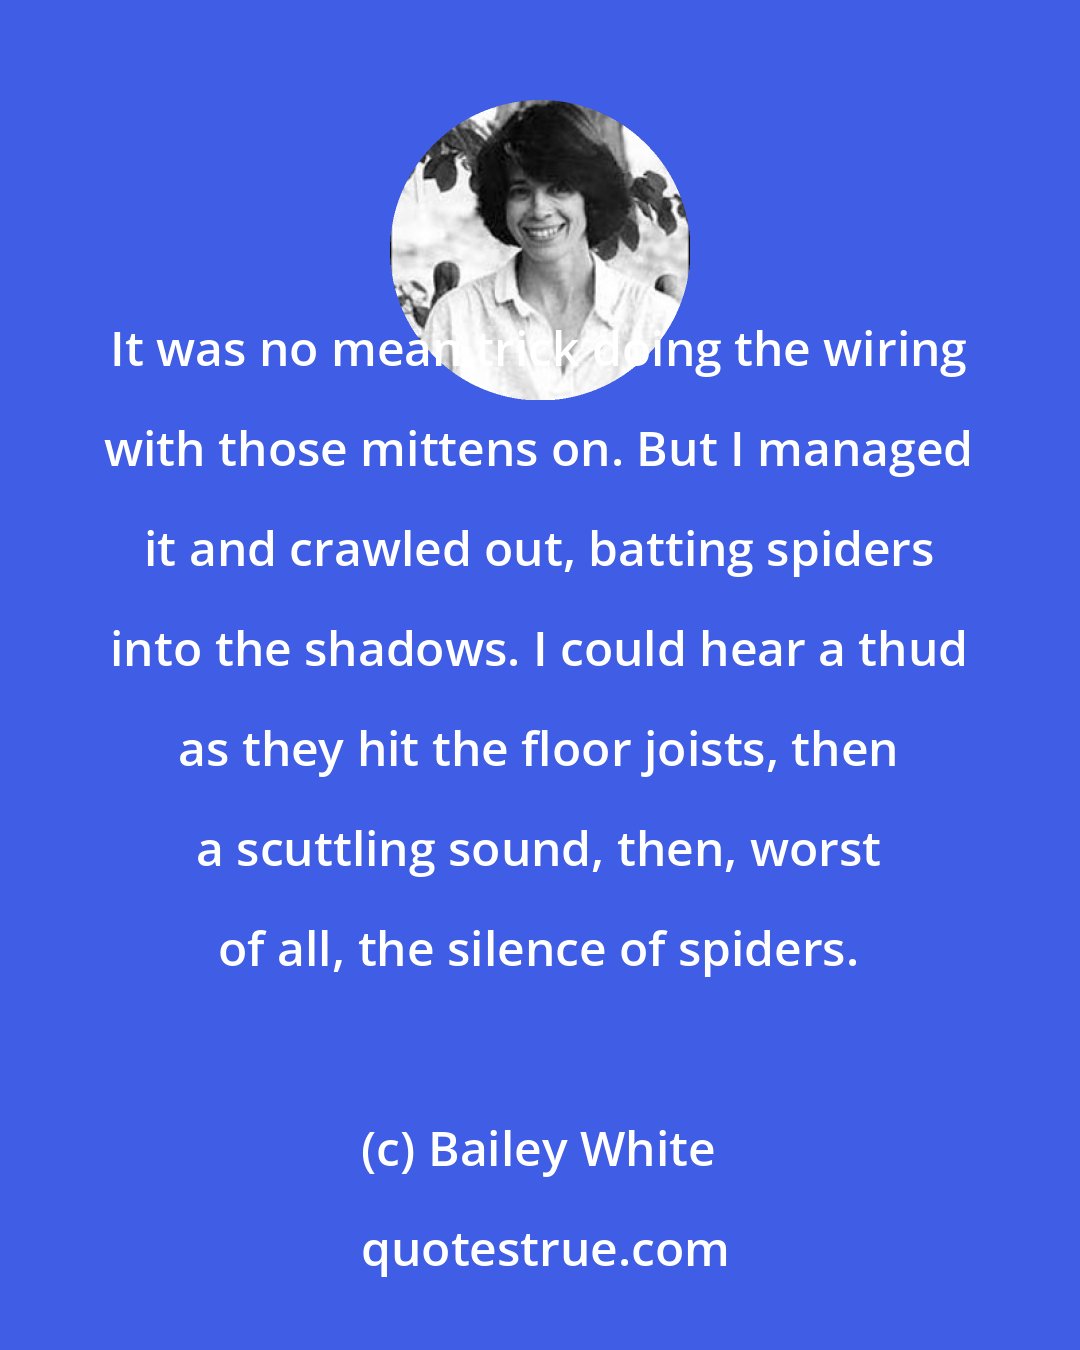 Bailey White: It was no mean trick doing the wiring with those mittens on. But I managed it and crawled out, batting spiders into the shadows. I could hear a thud as they hit the floor joists, then a scuttling sound, then, worst of all, the silence of spiders.